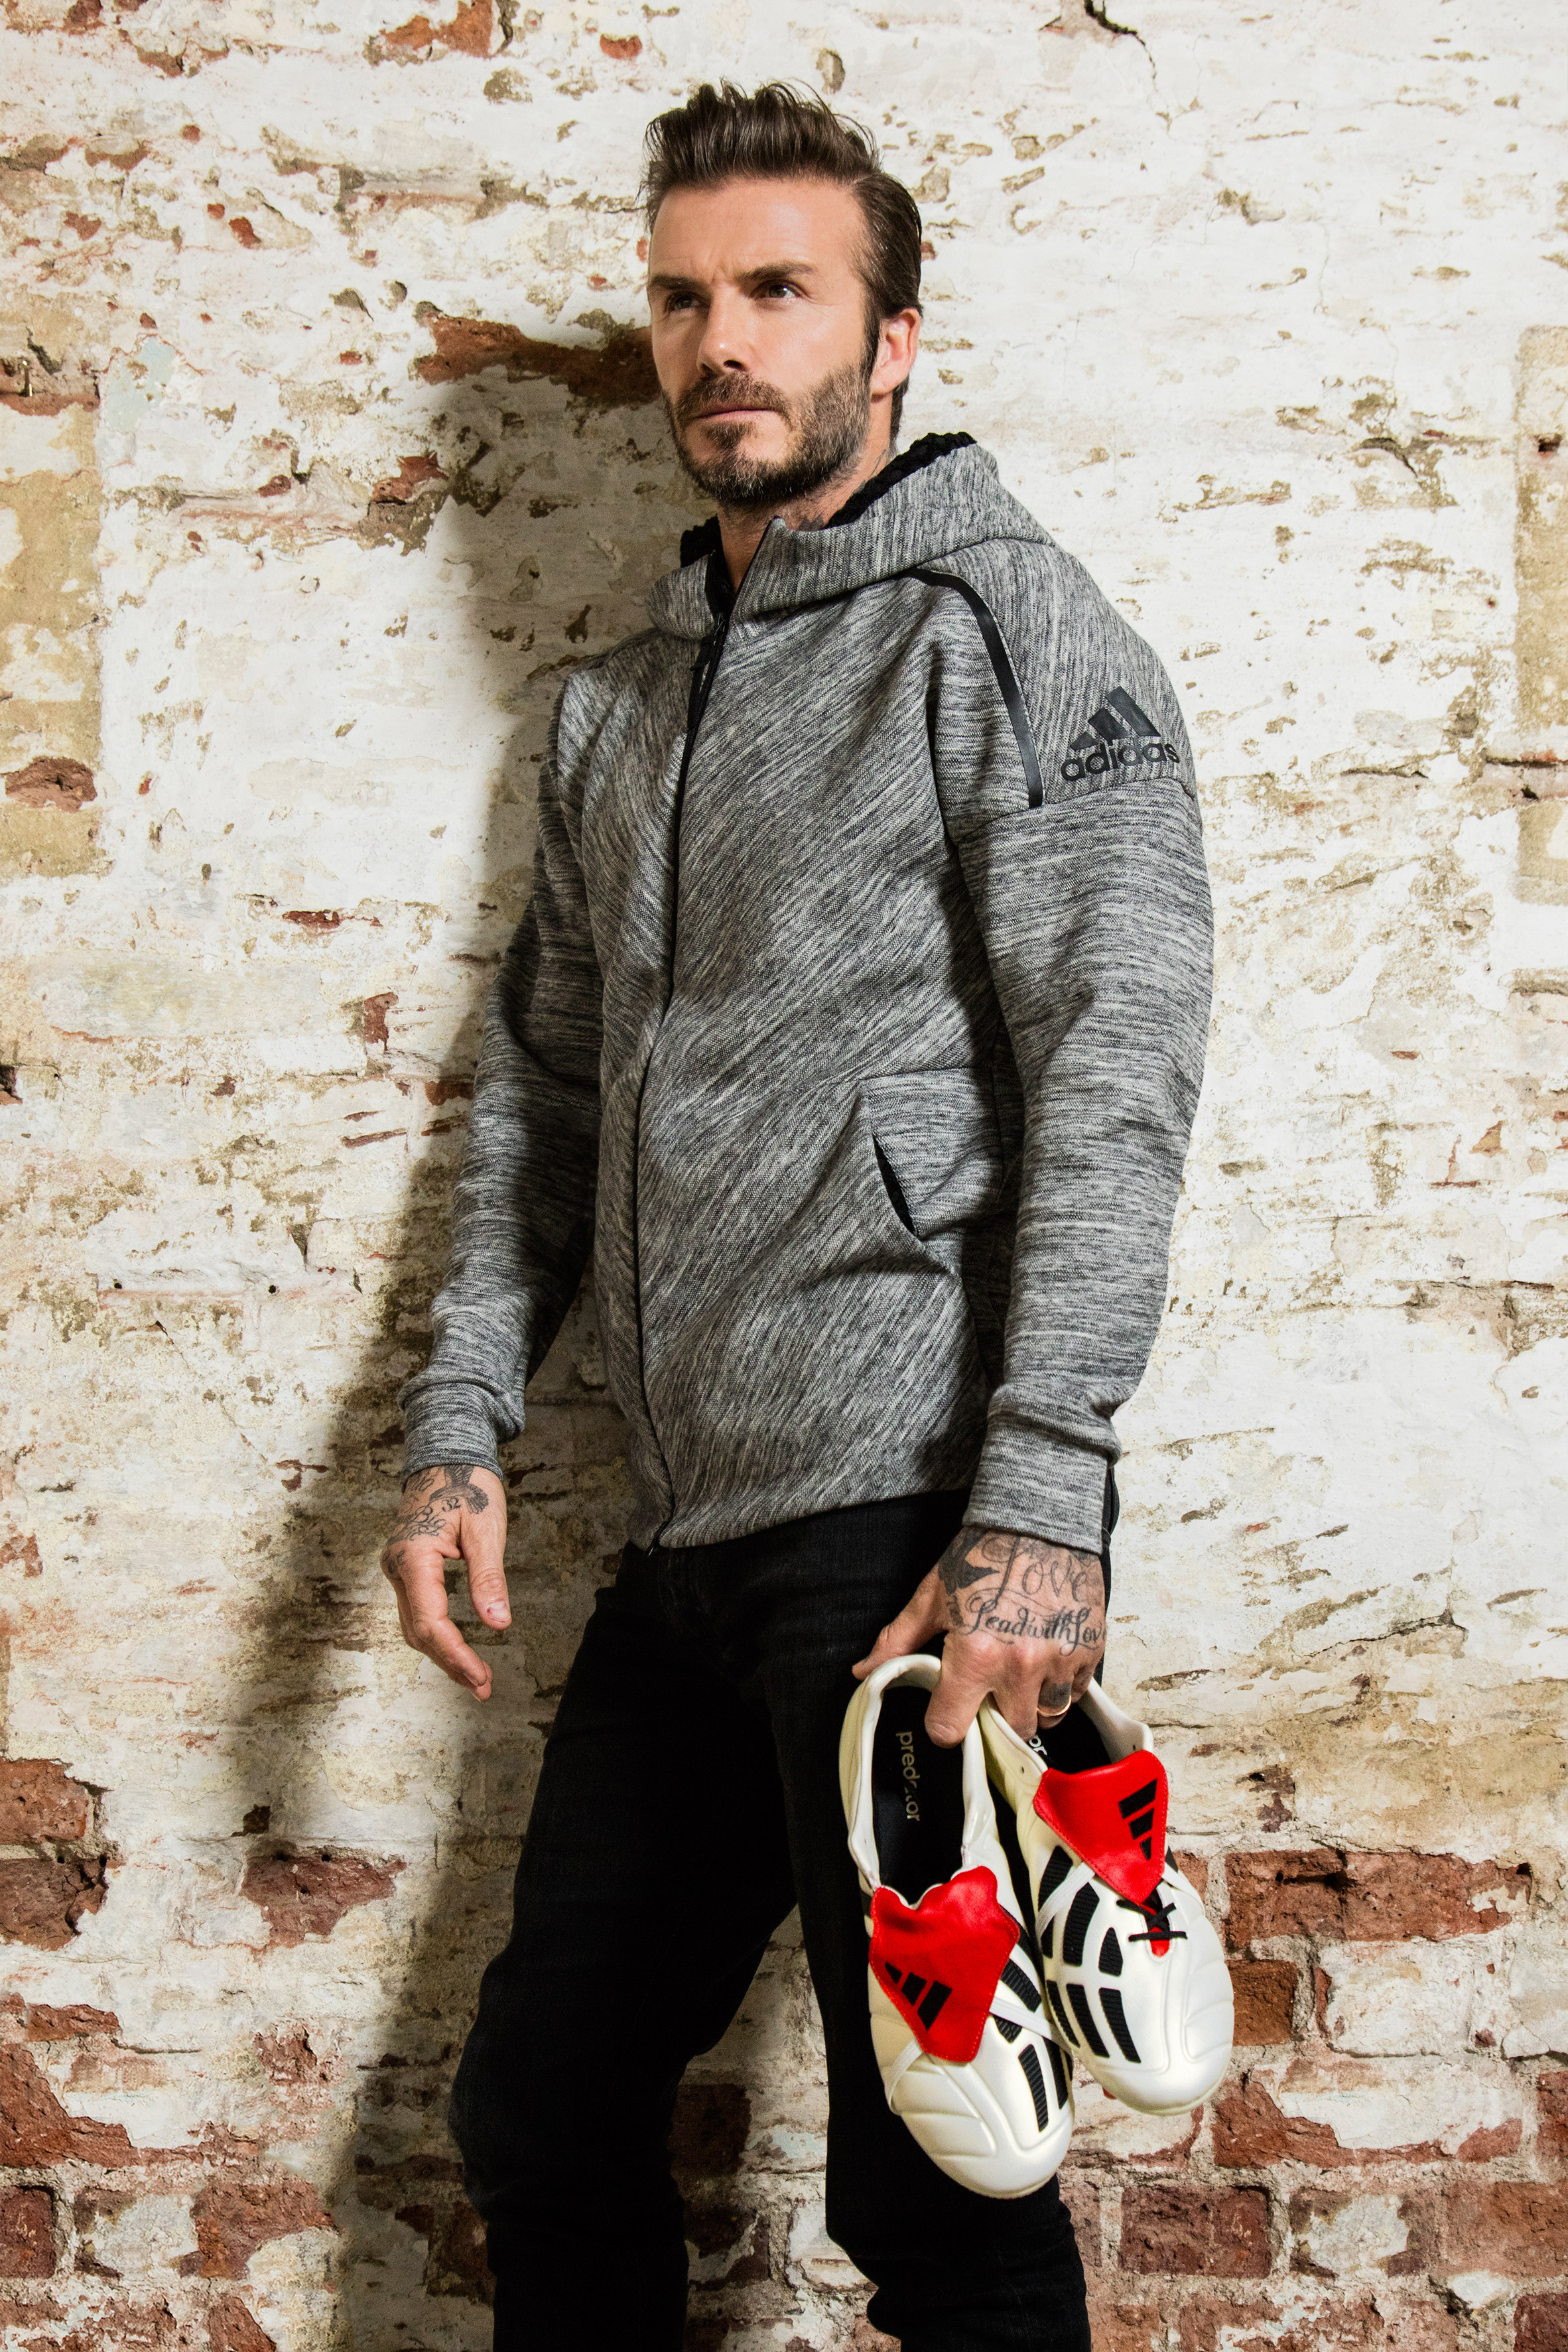 Former Manchester United and Real Madrid midfield David Beckham holding the new Predator Mania boots.